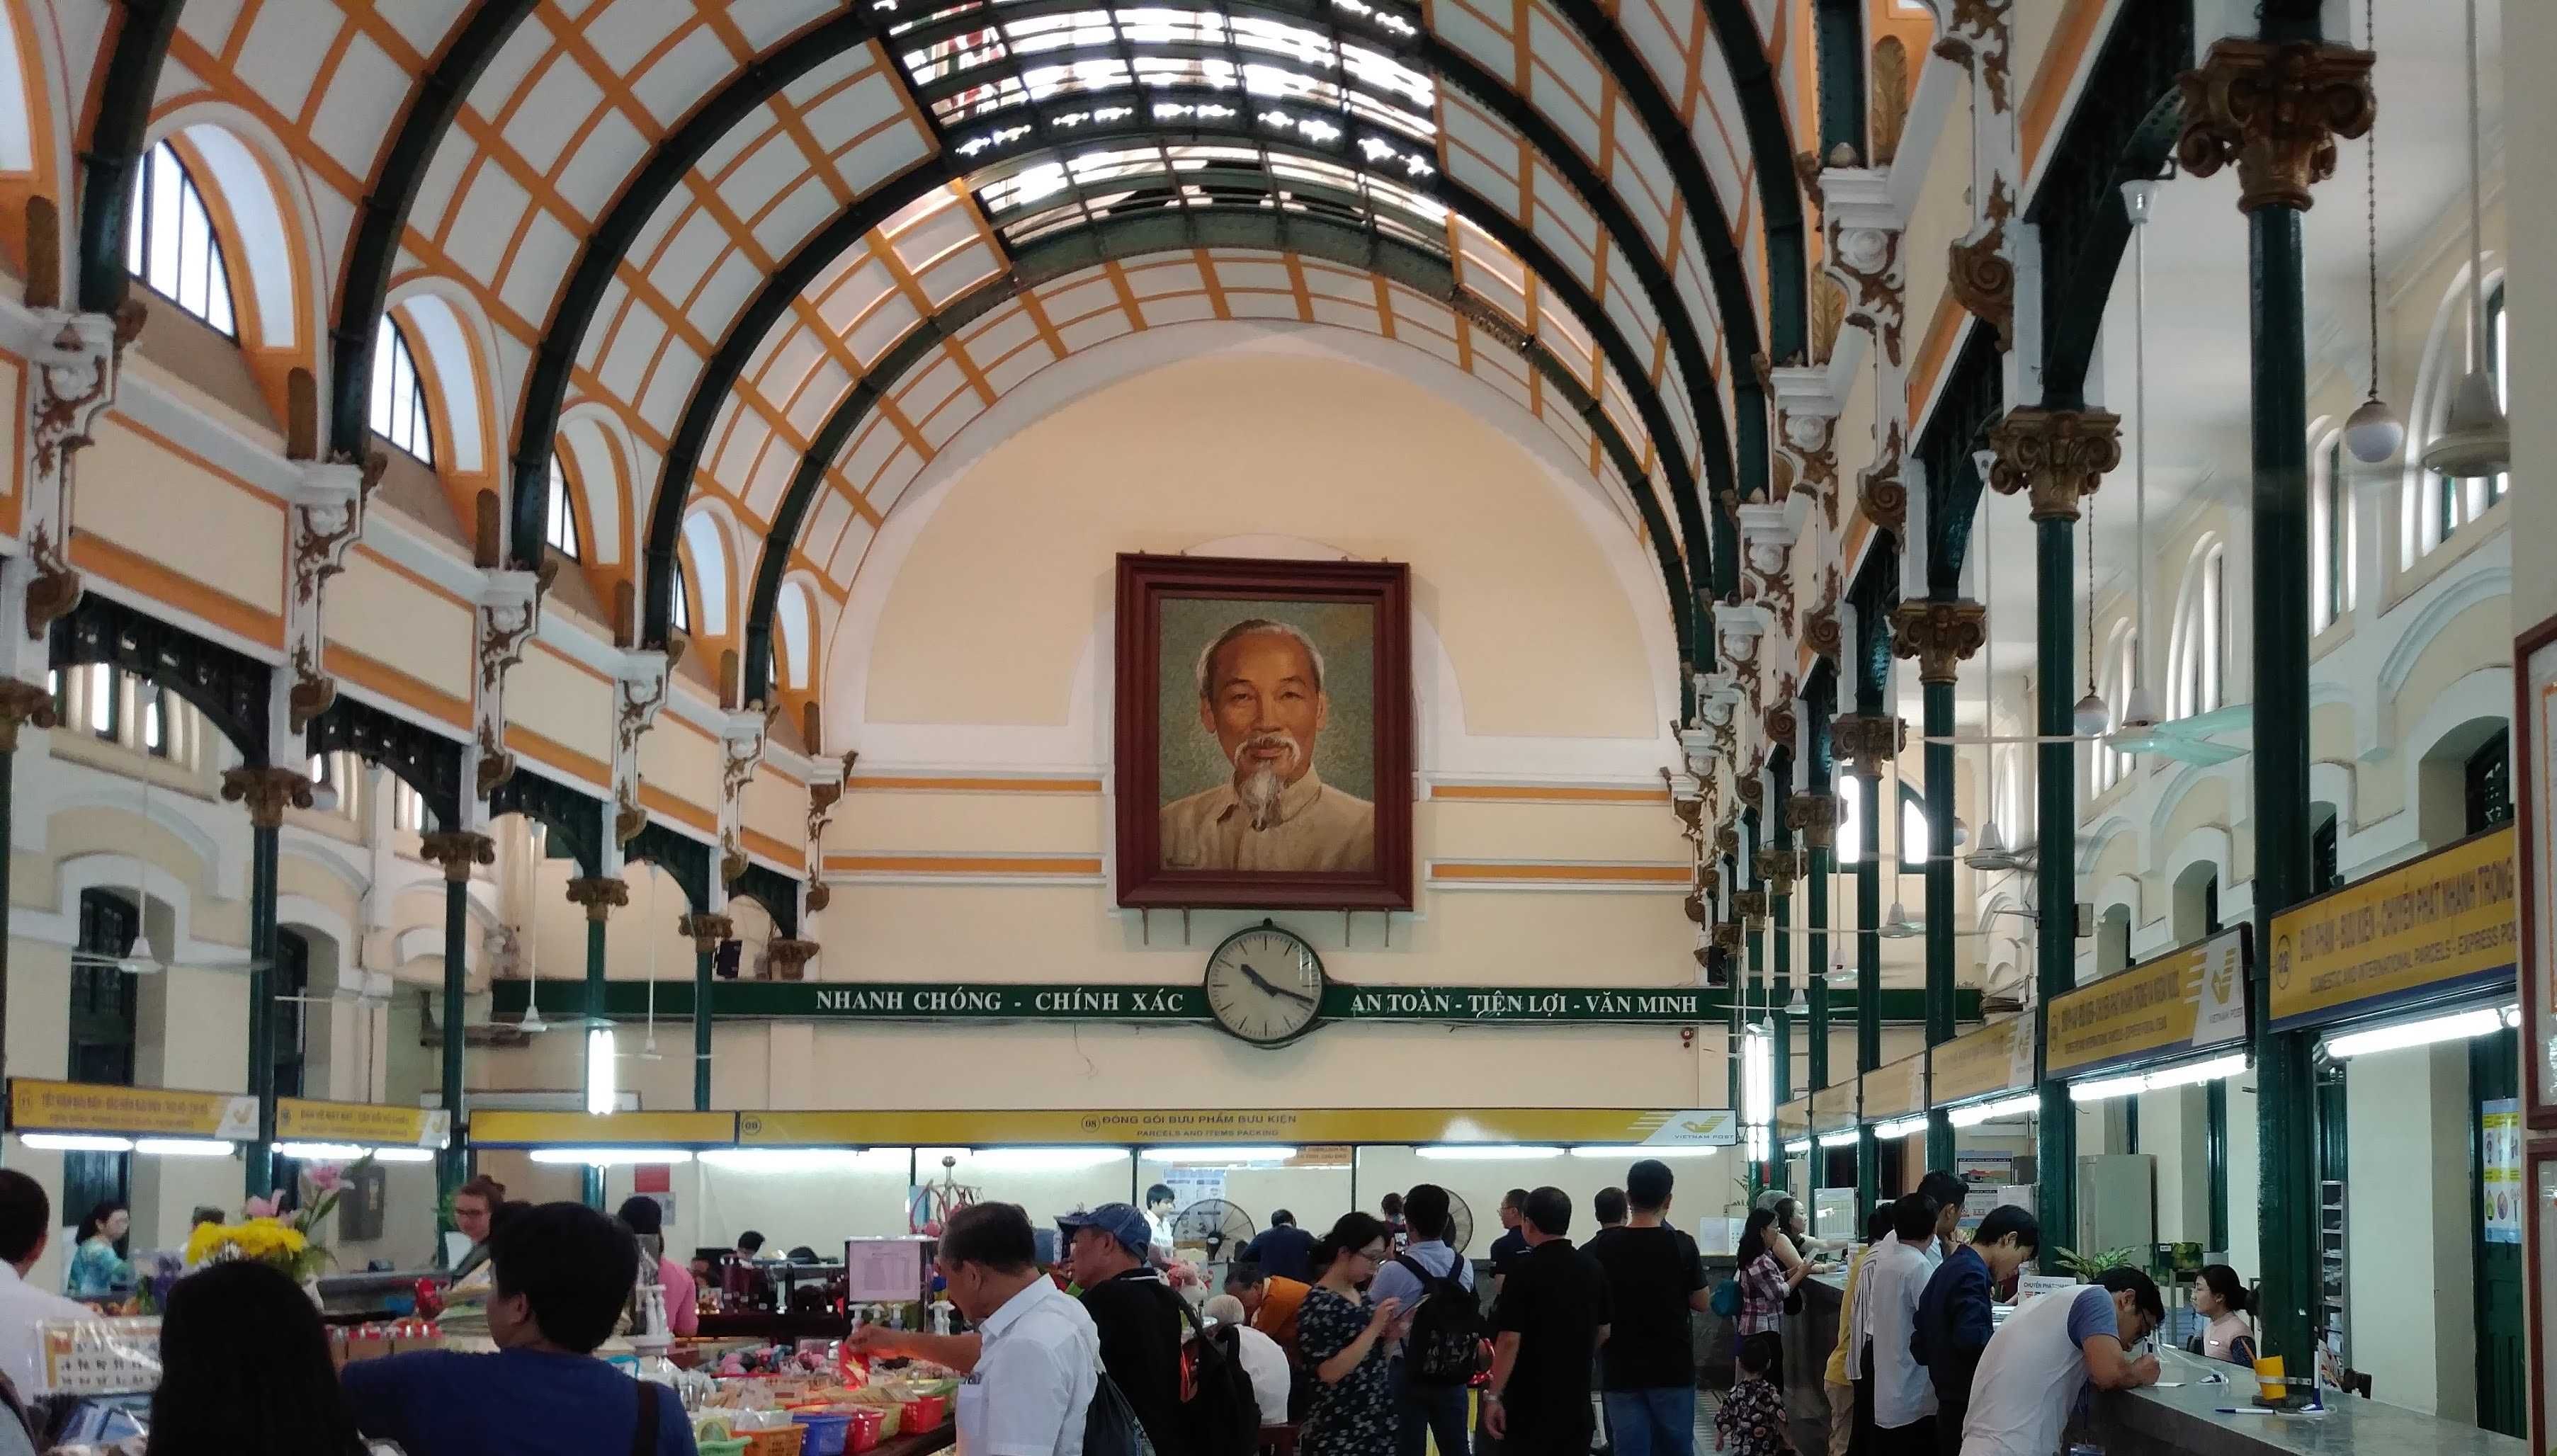 Saigon Central Post Office is seen in a photo taken by Kyle Nunas in September 2017.